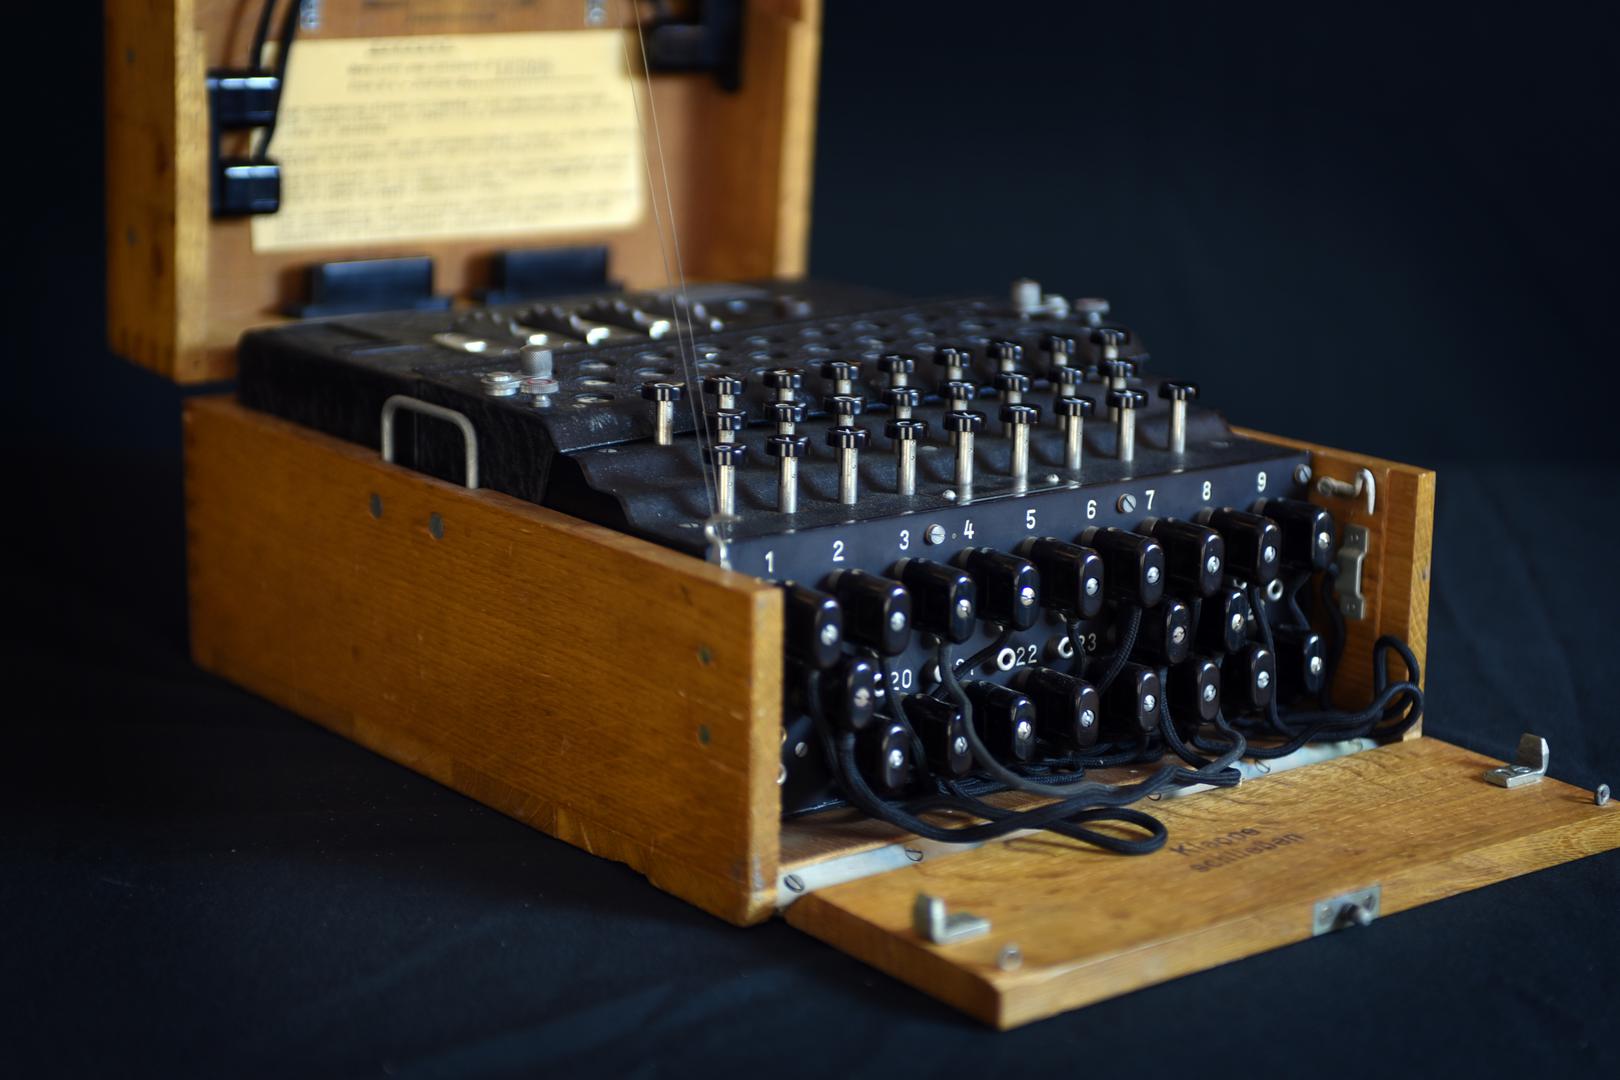 How Alan Turing Cracked The Enigma Code